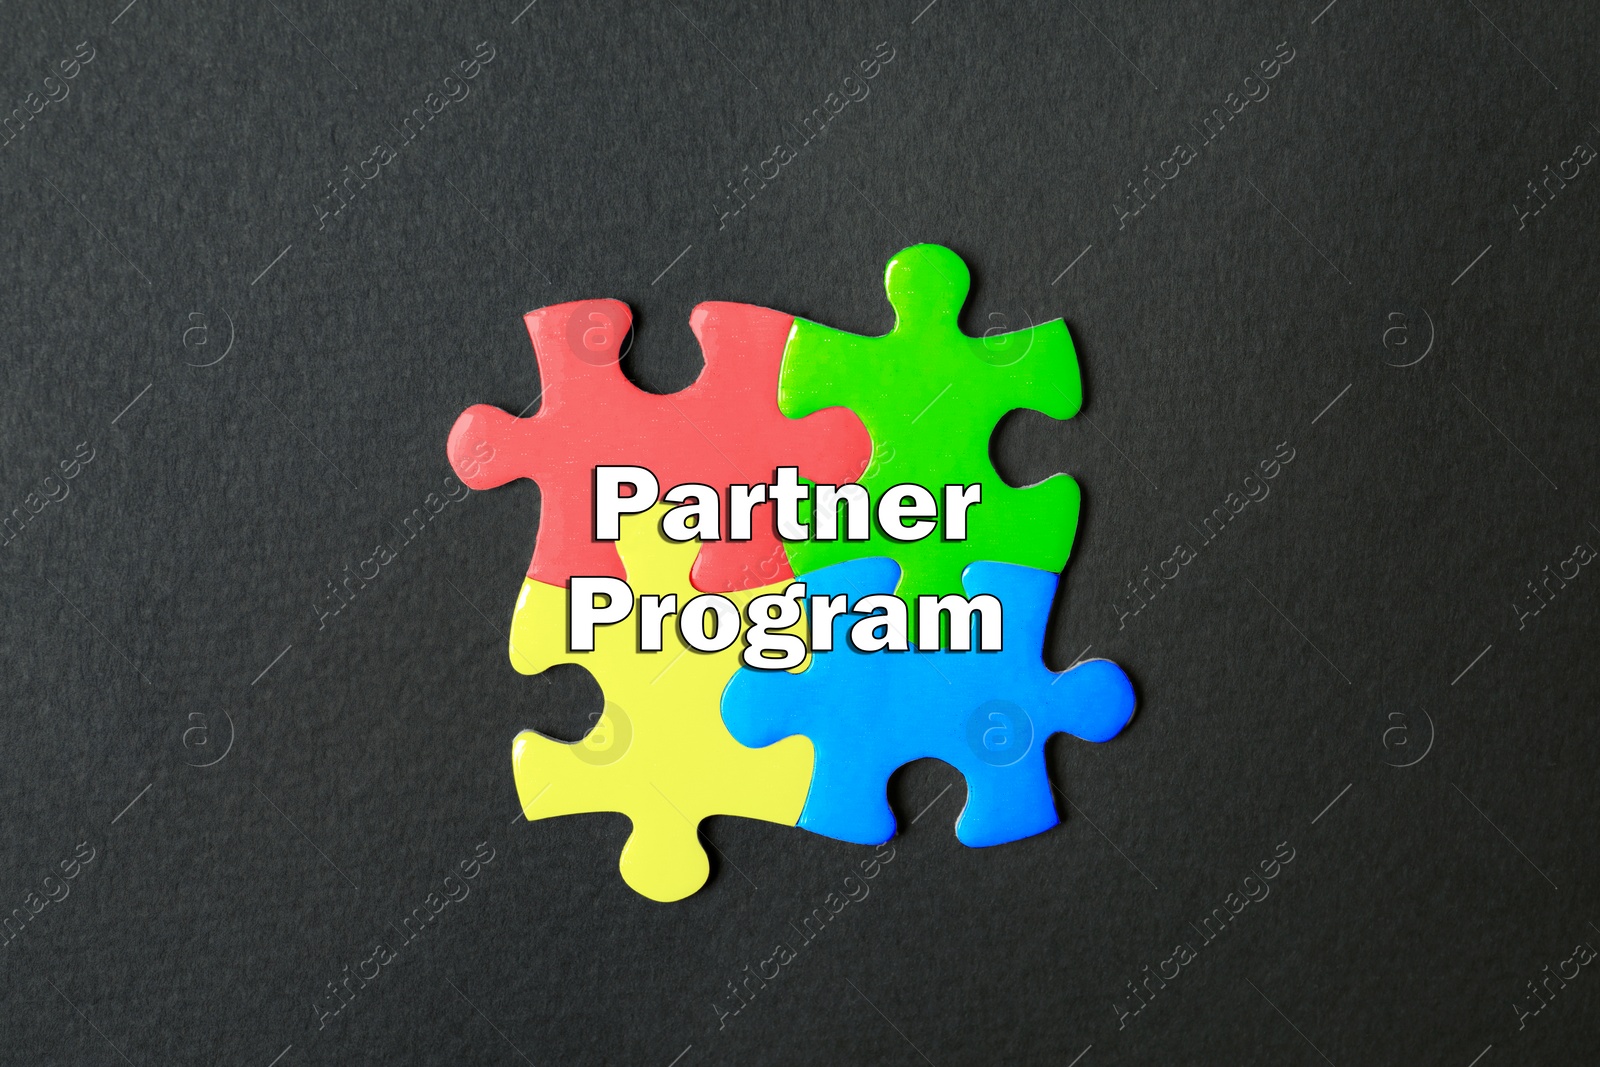 Image of Jigsaw puzzle pieces with words Partner Program on black background, top view